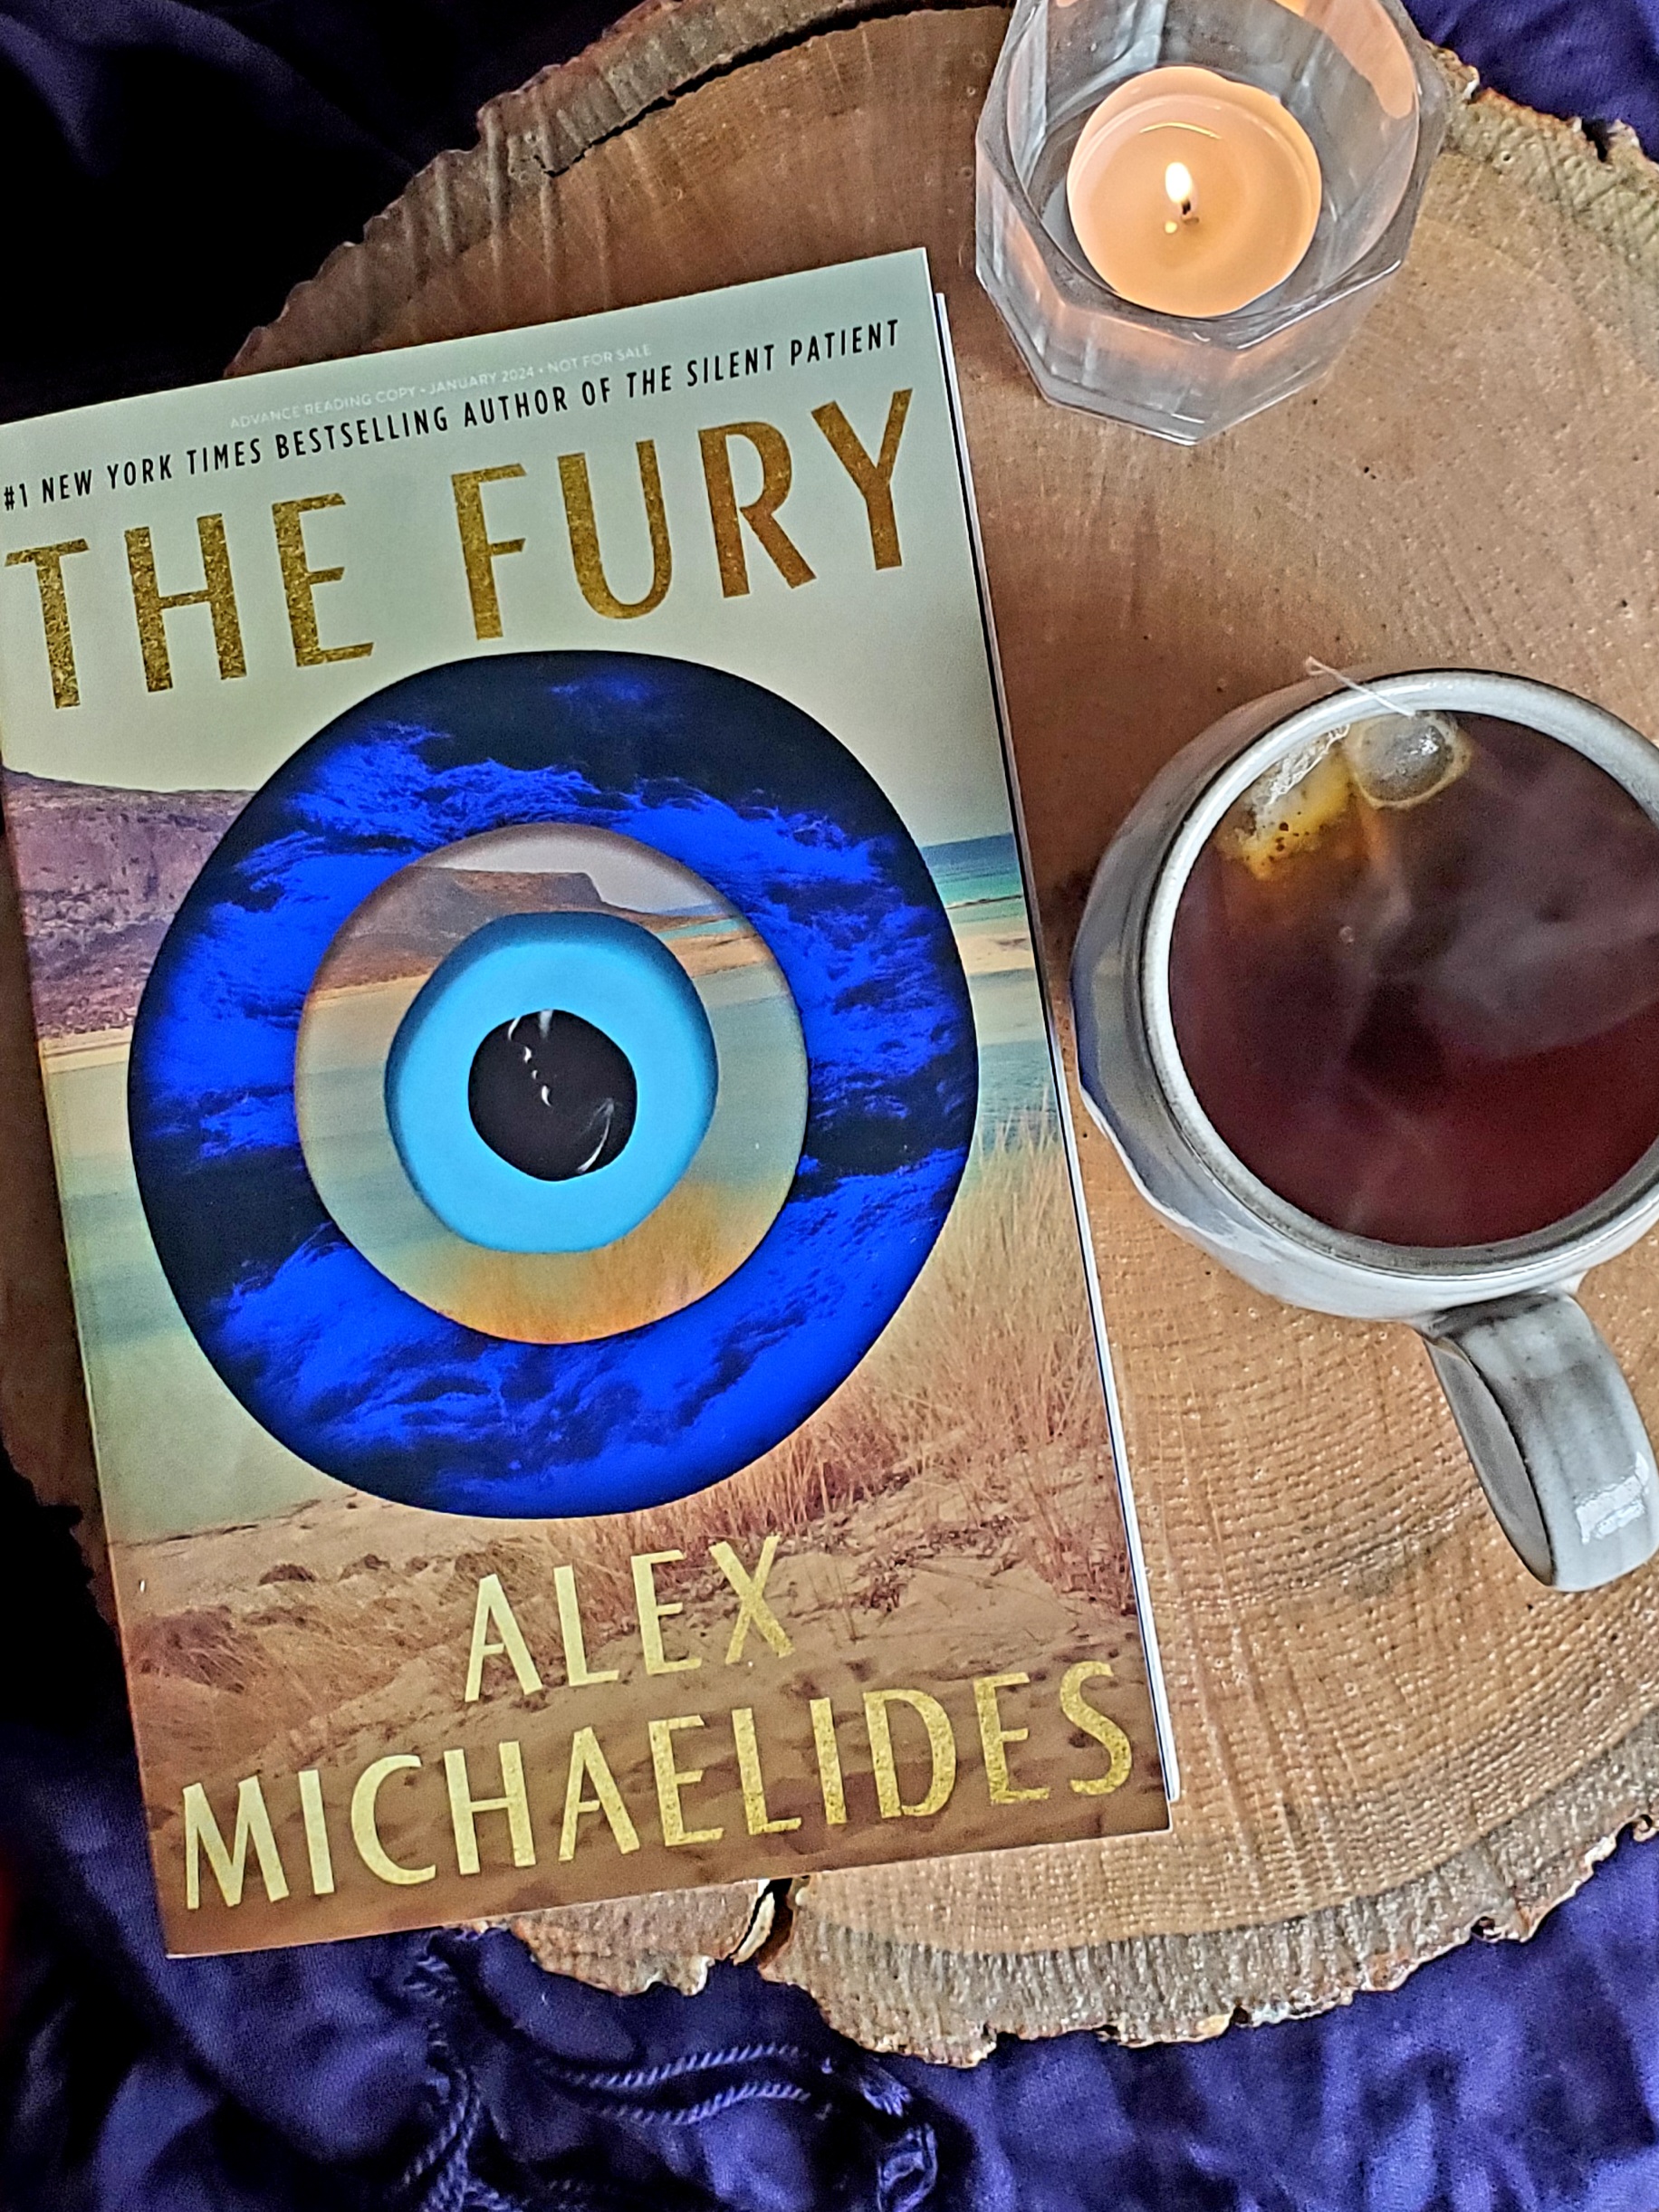 Book Review of THE FURY